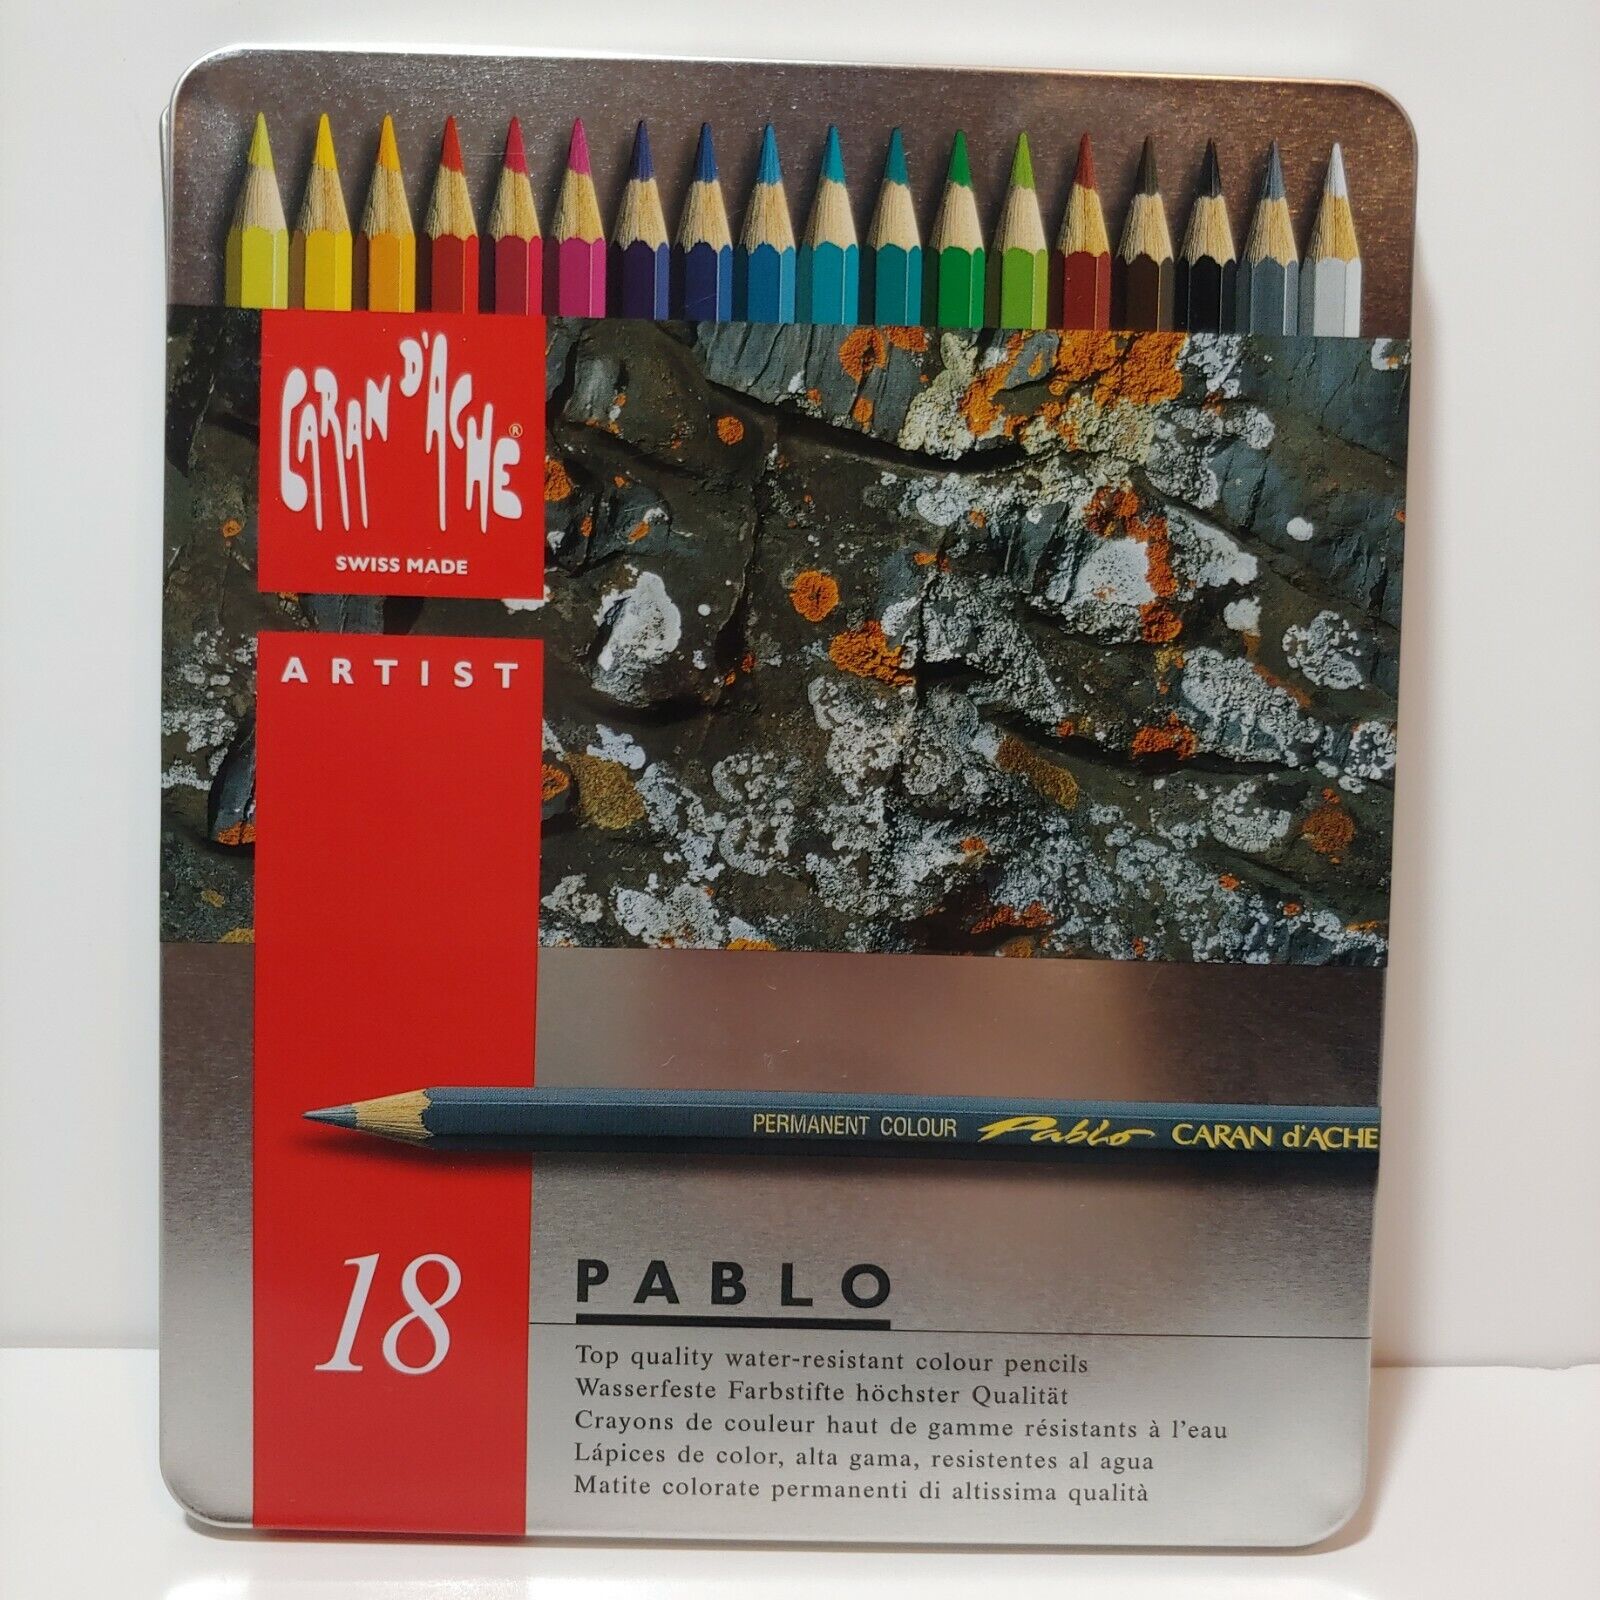 Caran d'Ache Pablo Swiss Made Permanent 666 Colored Pencils 18 New Not Sealed